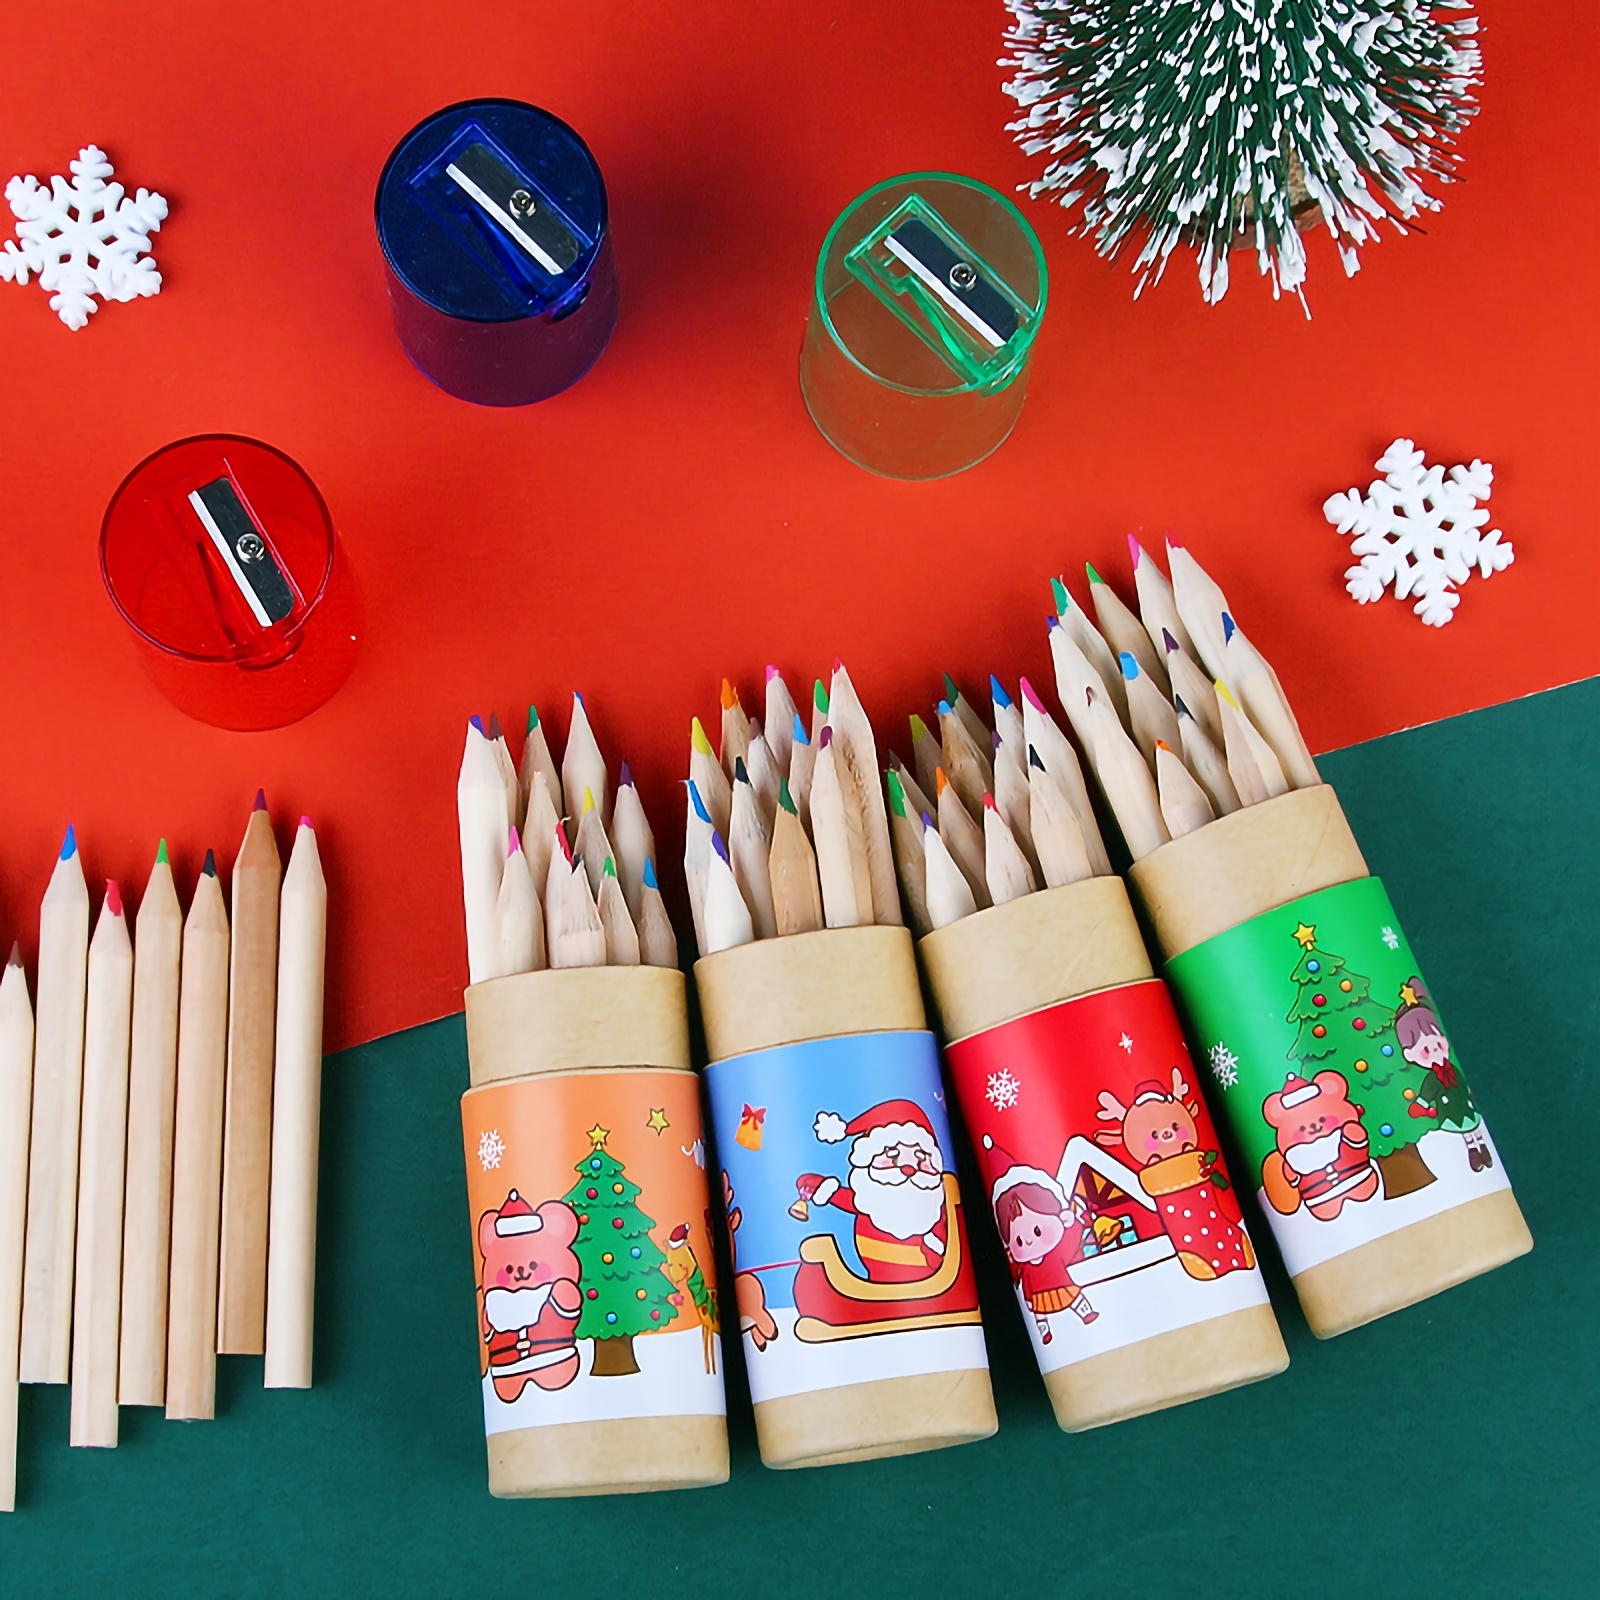 Magic Shimmer Paint Pens,for Adults Christmas Art Coloring